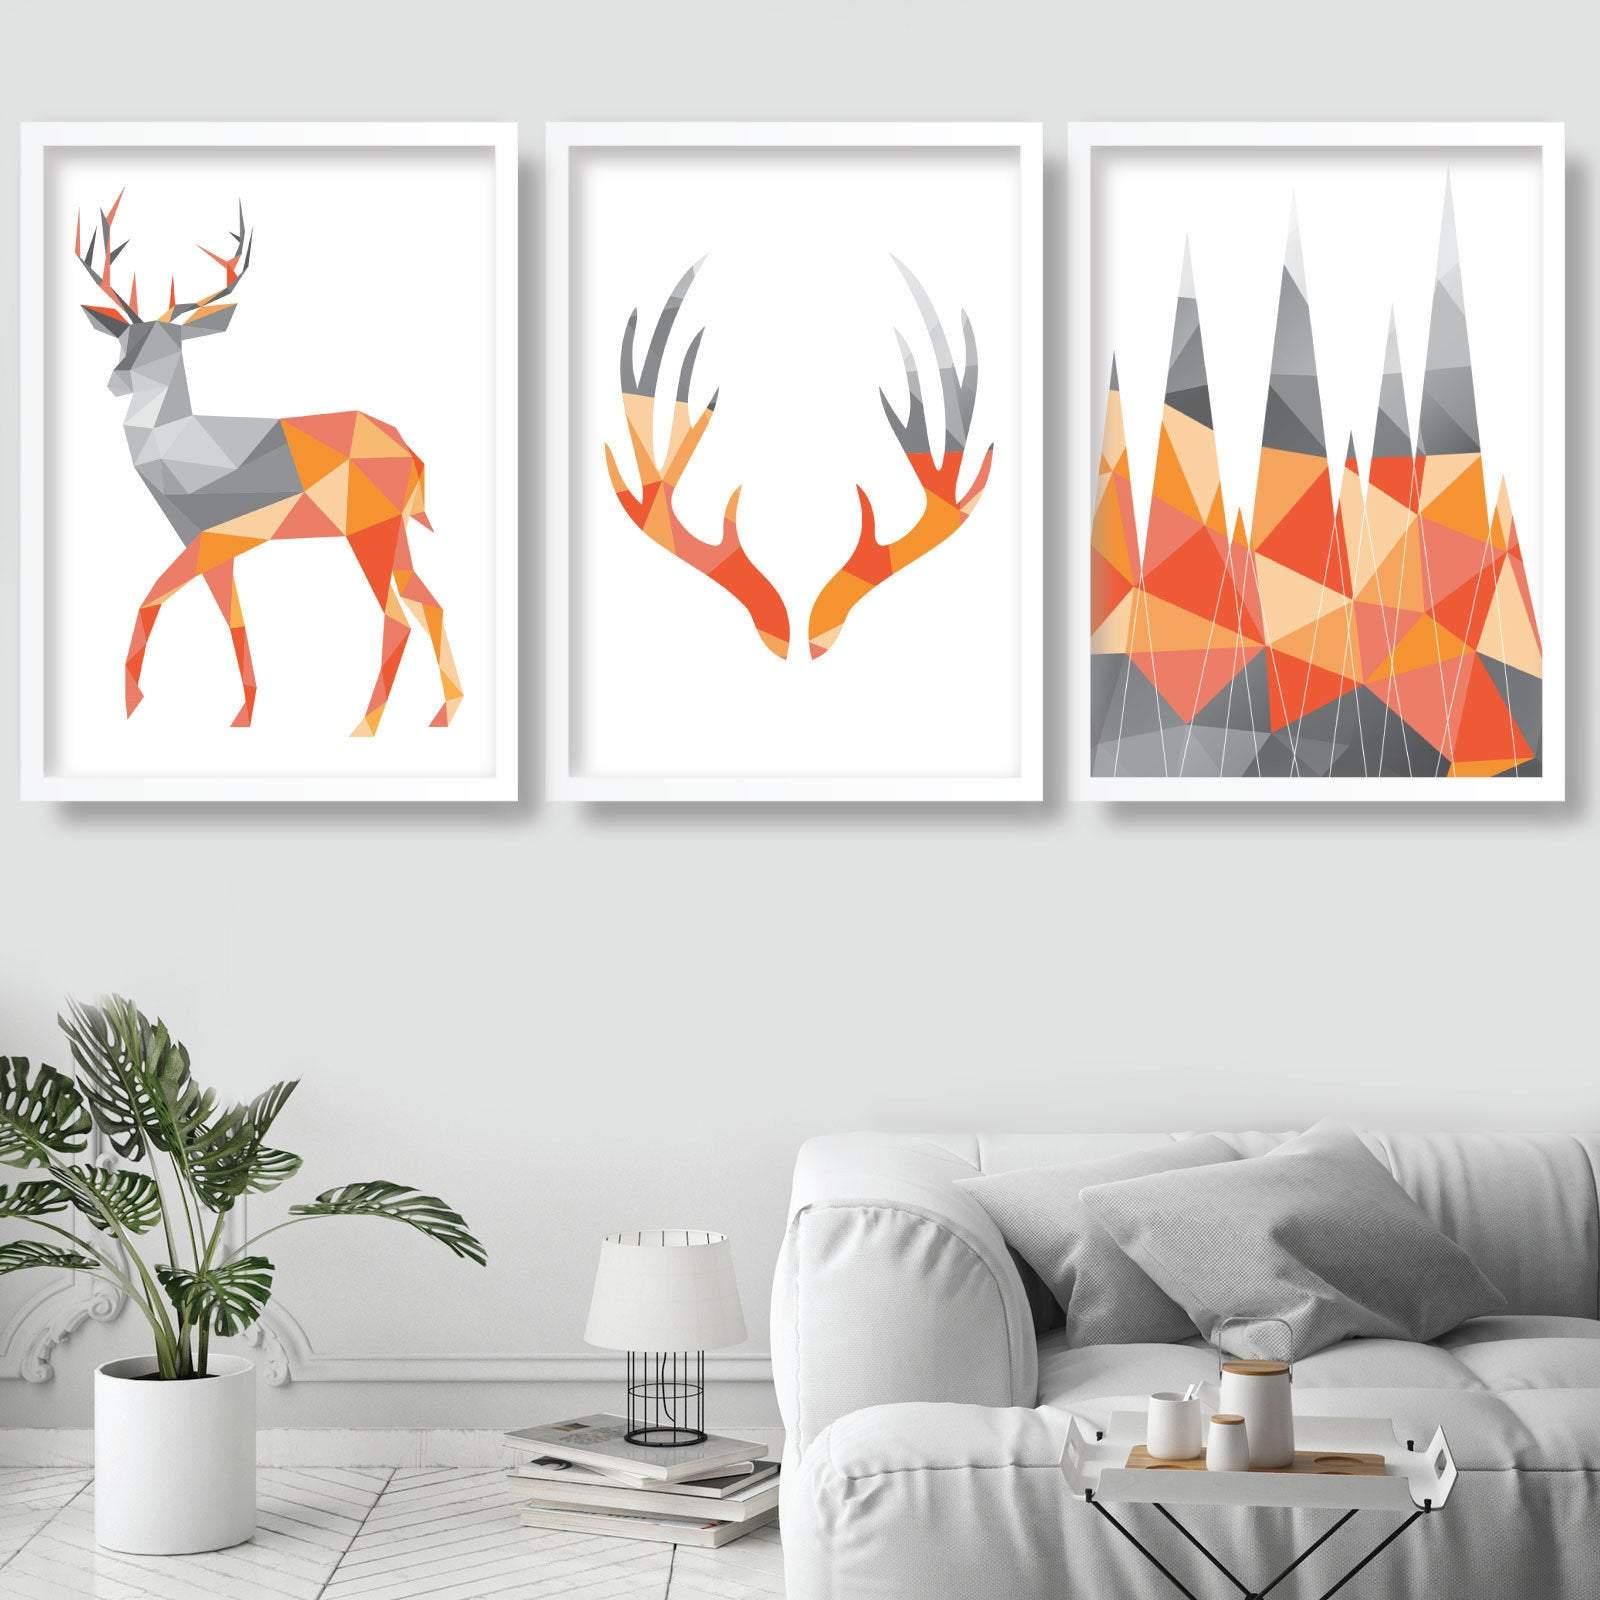 GEOMETRIC set of 3 ORANGE & Grey Art Prints STAG Antlers and Mountains